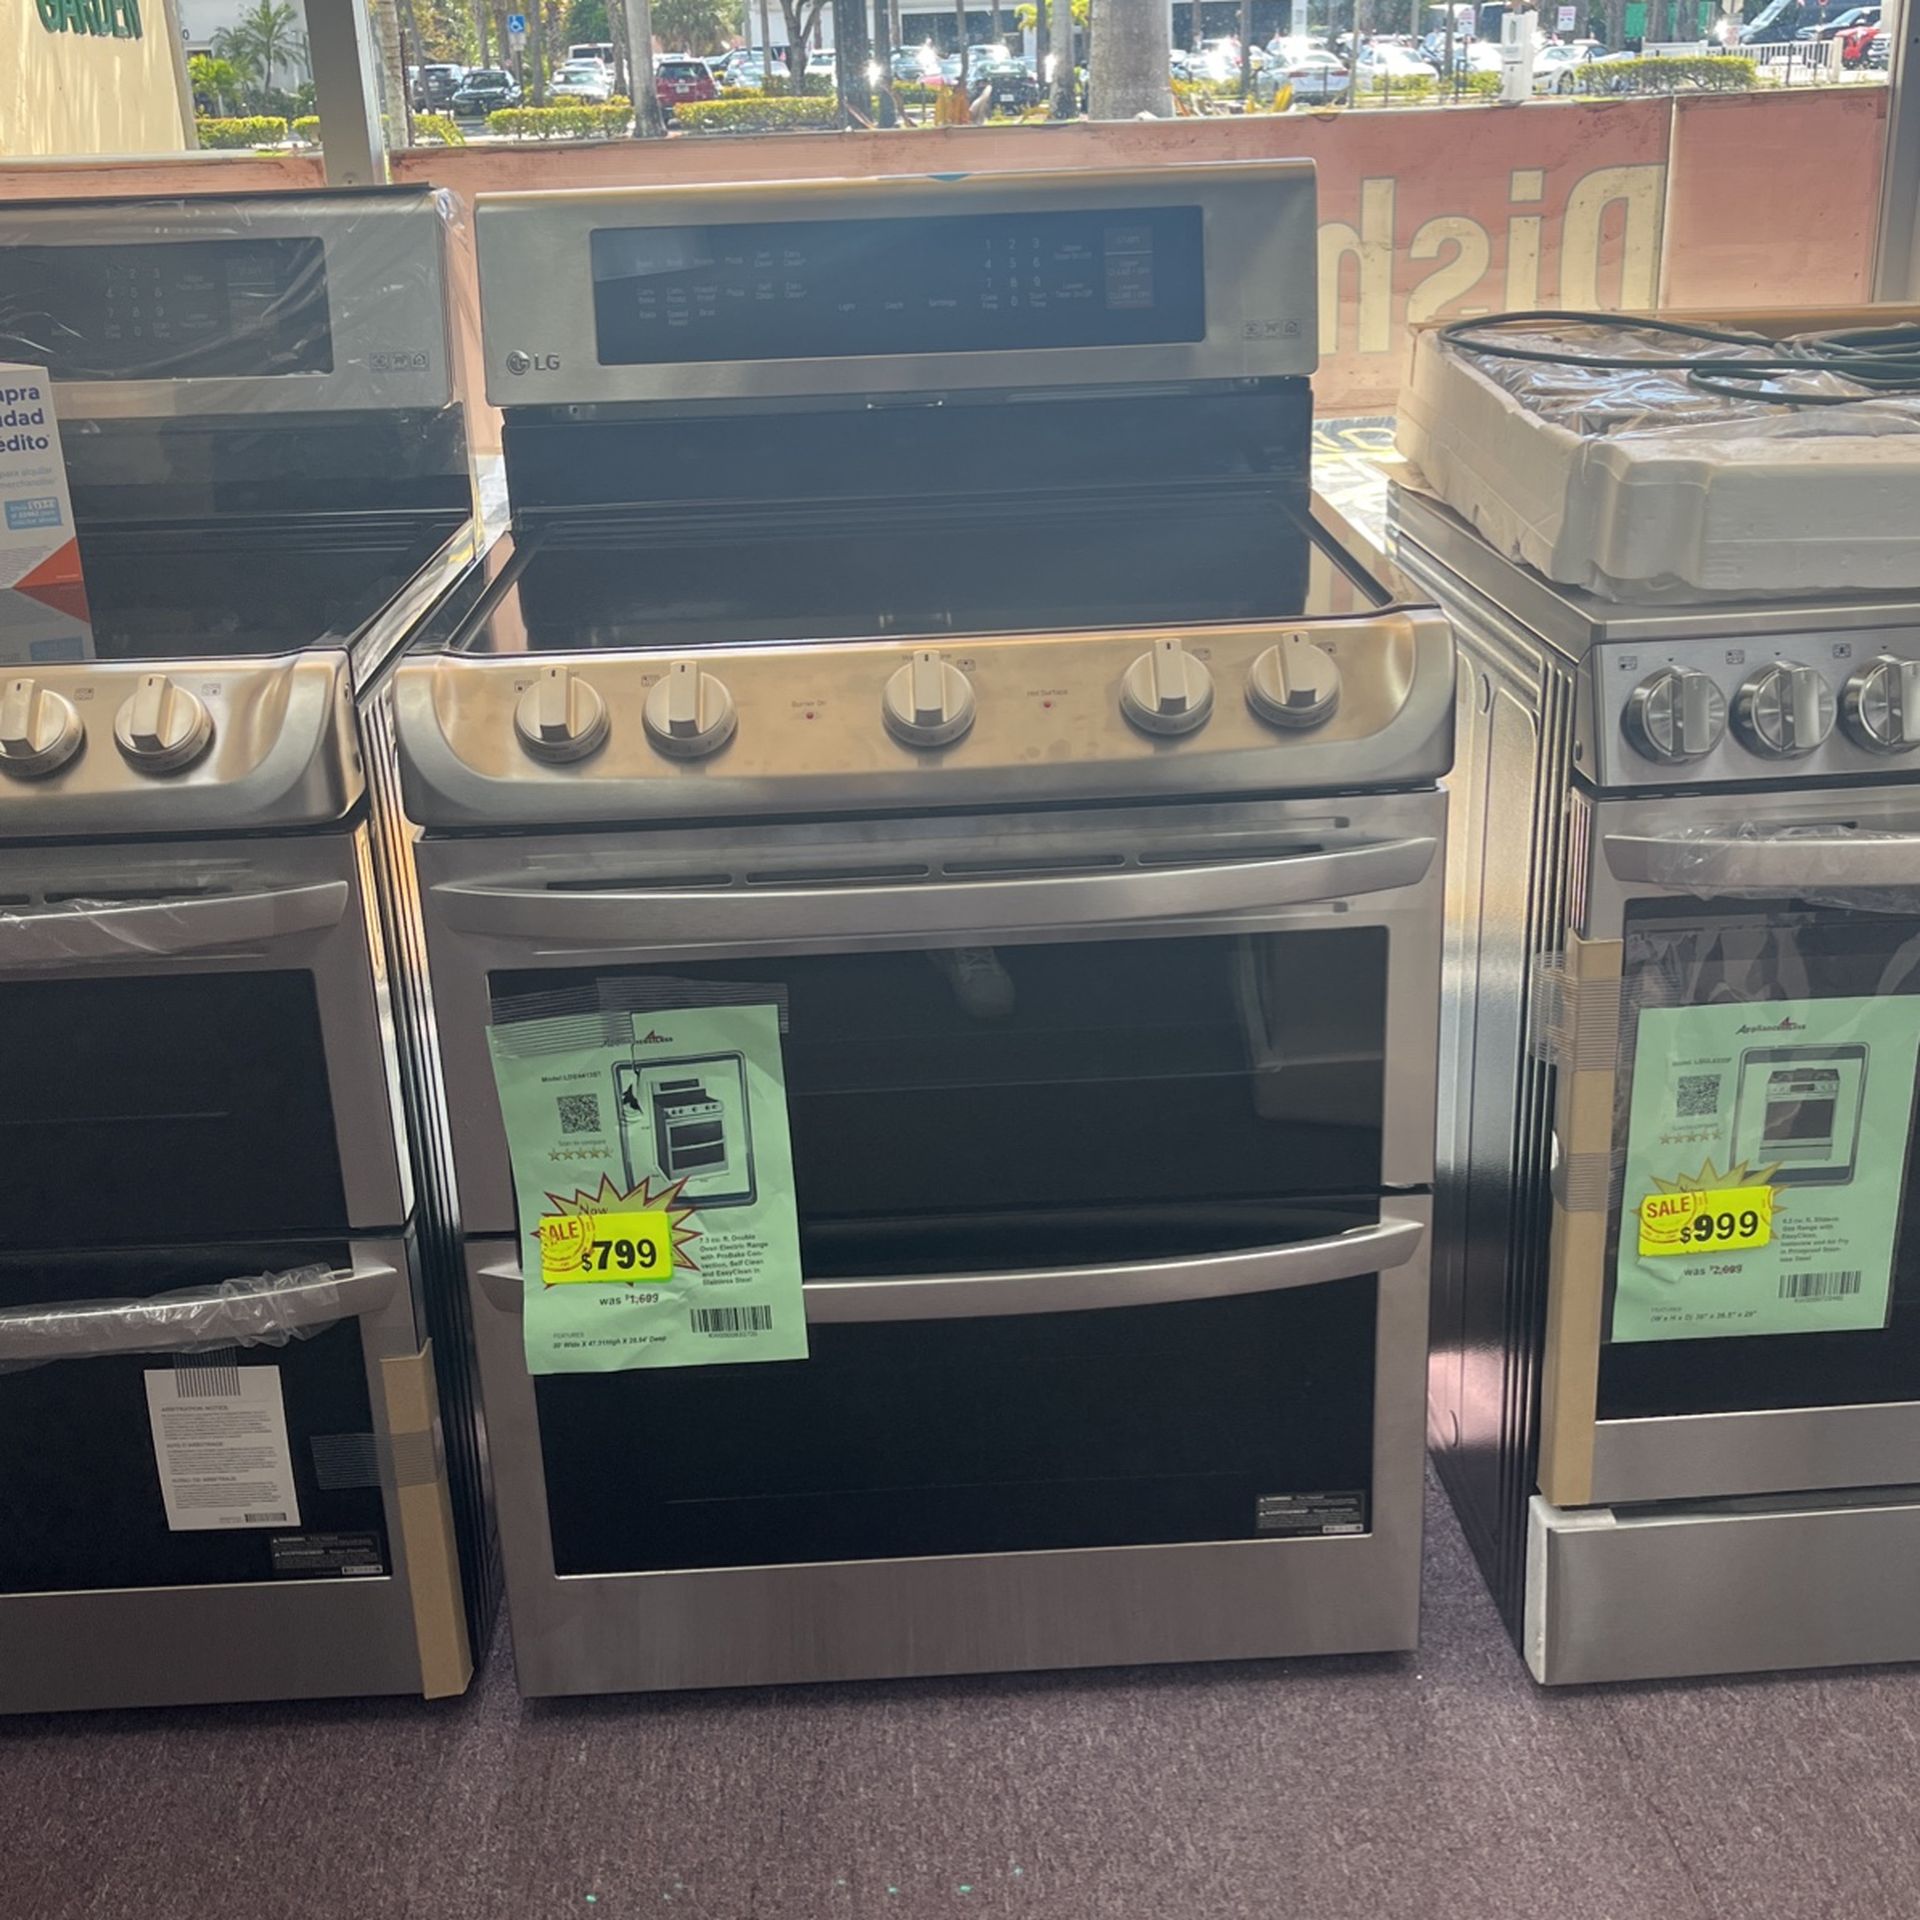 Stove Double Oven Lg New Open Box And Some Dents And 1 Year Warranty 